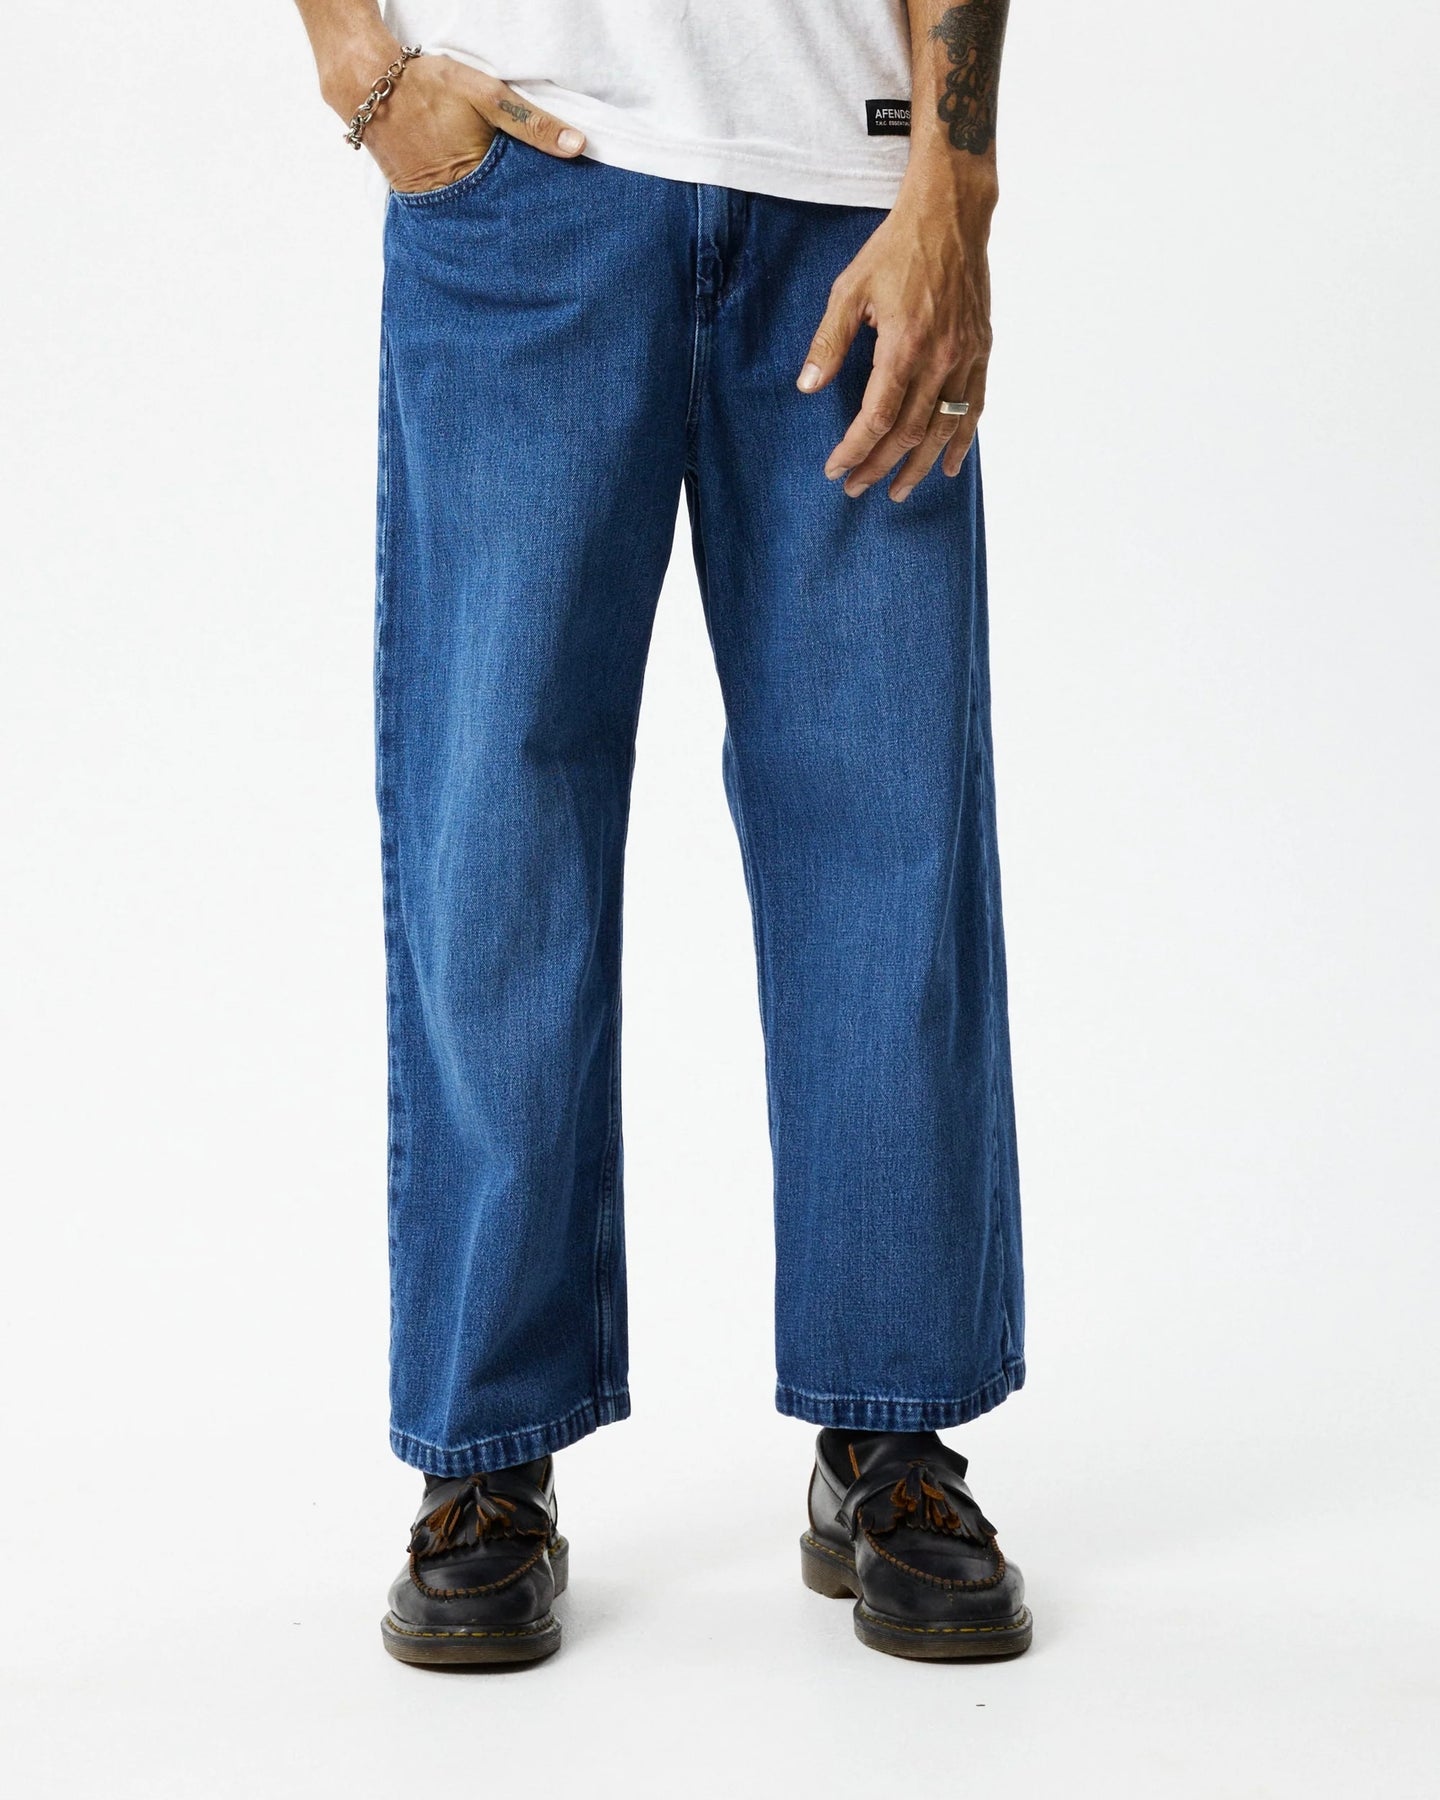 Afends Men's Pablo Baggy Jean in Authentic Blue